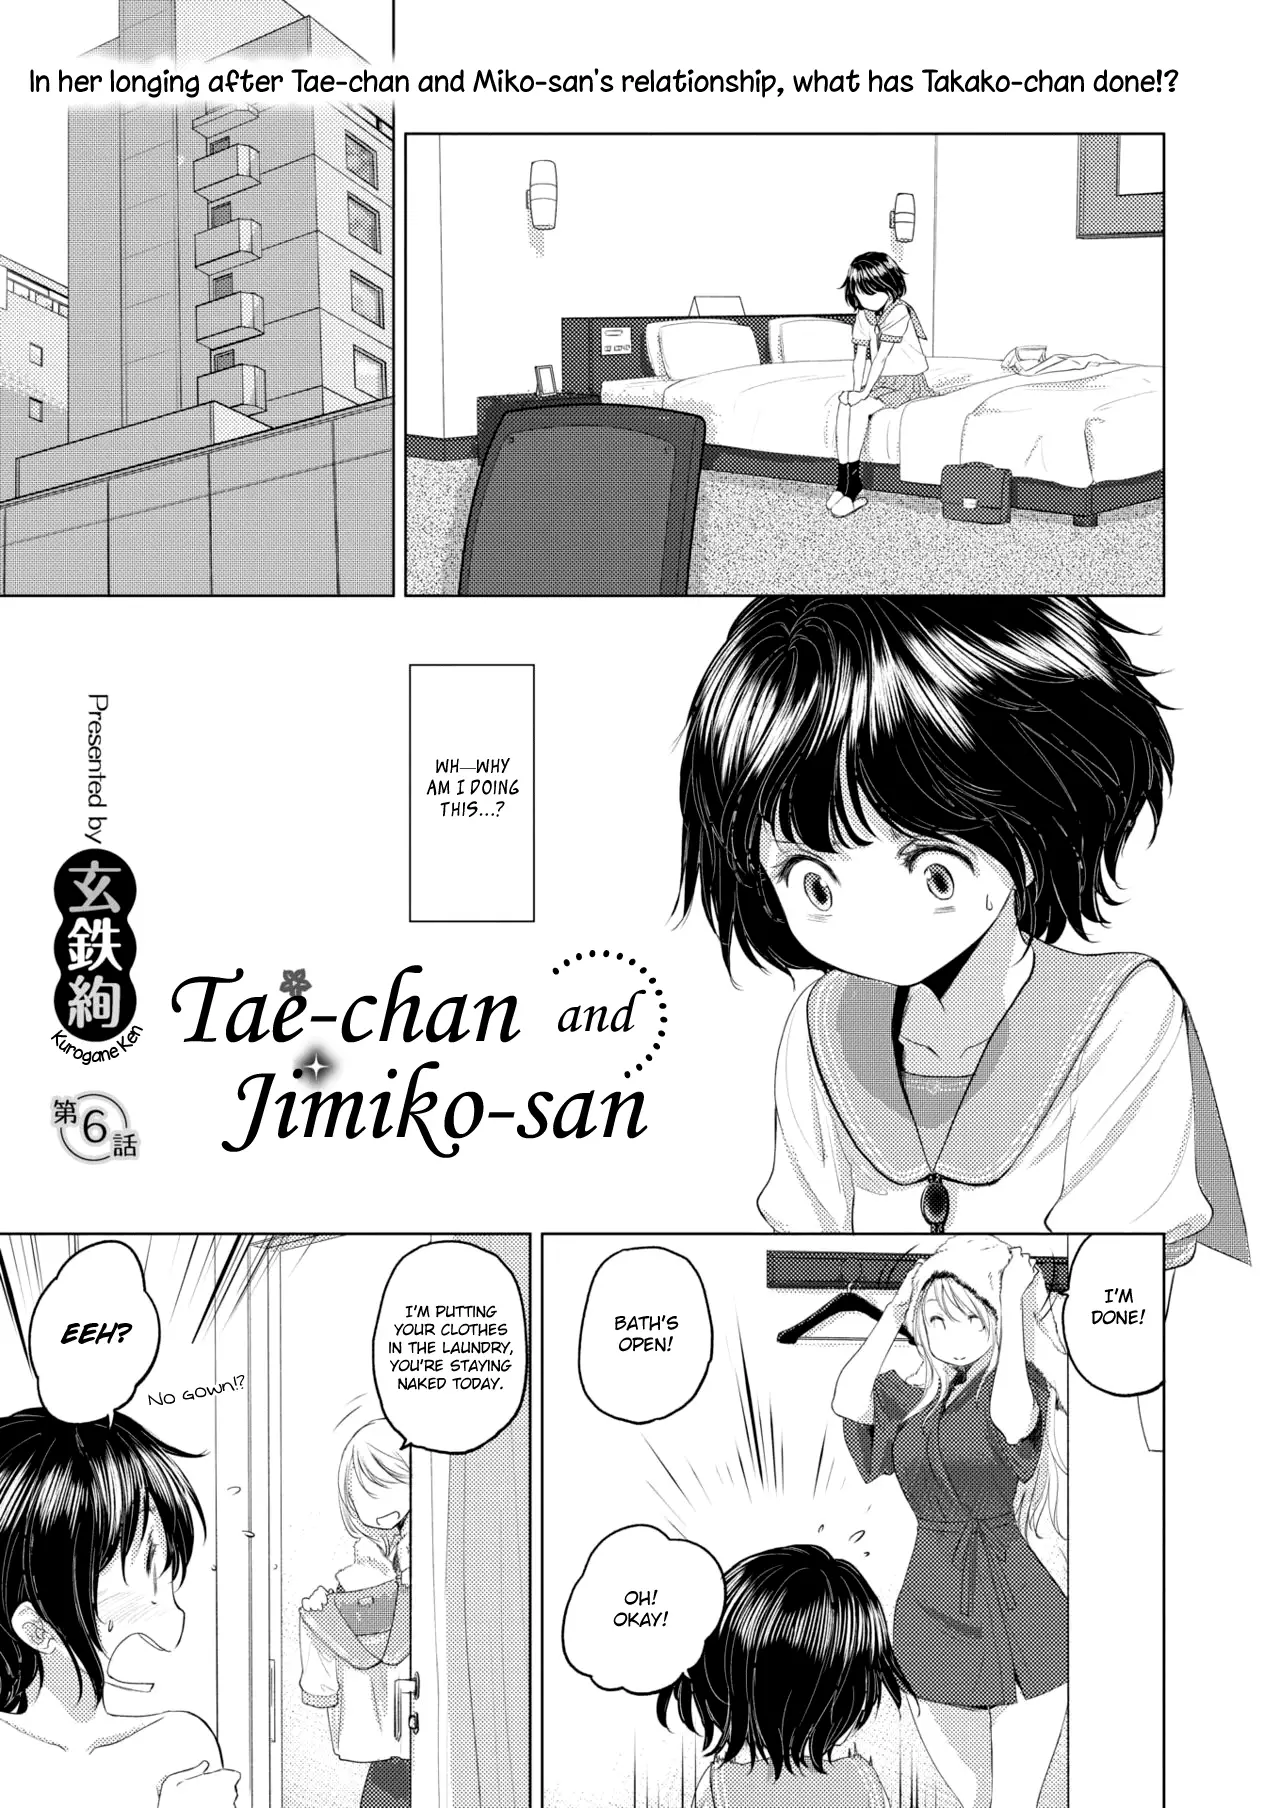 Tae-chan and Jimiko-san - Chapter 6 Page 1